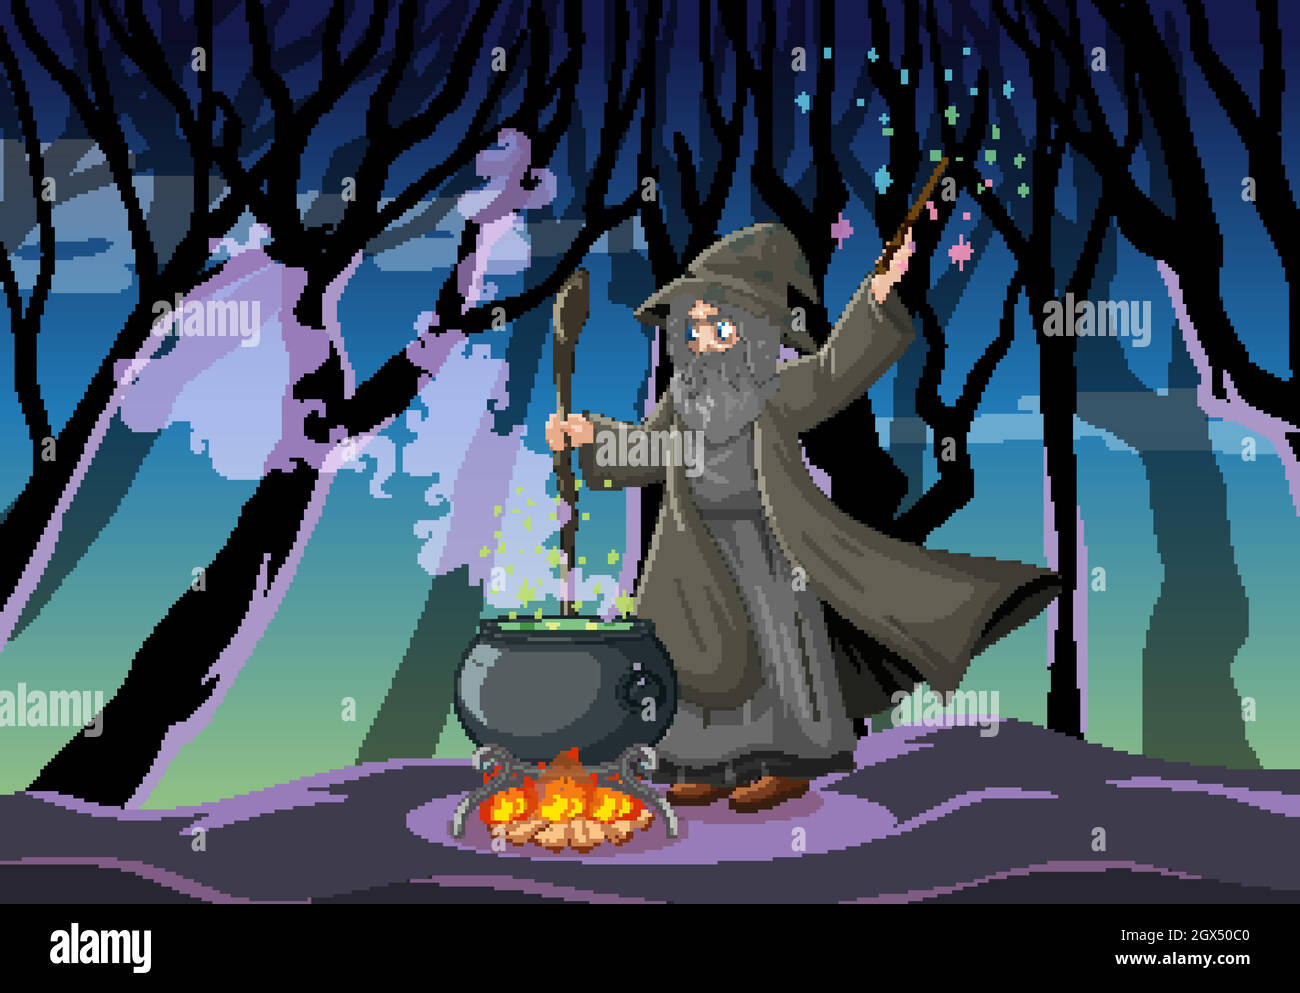 Wizard or witch with magic pot on dark forest scene Stock Vector